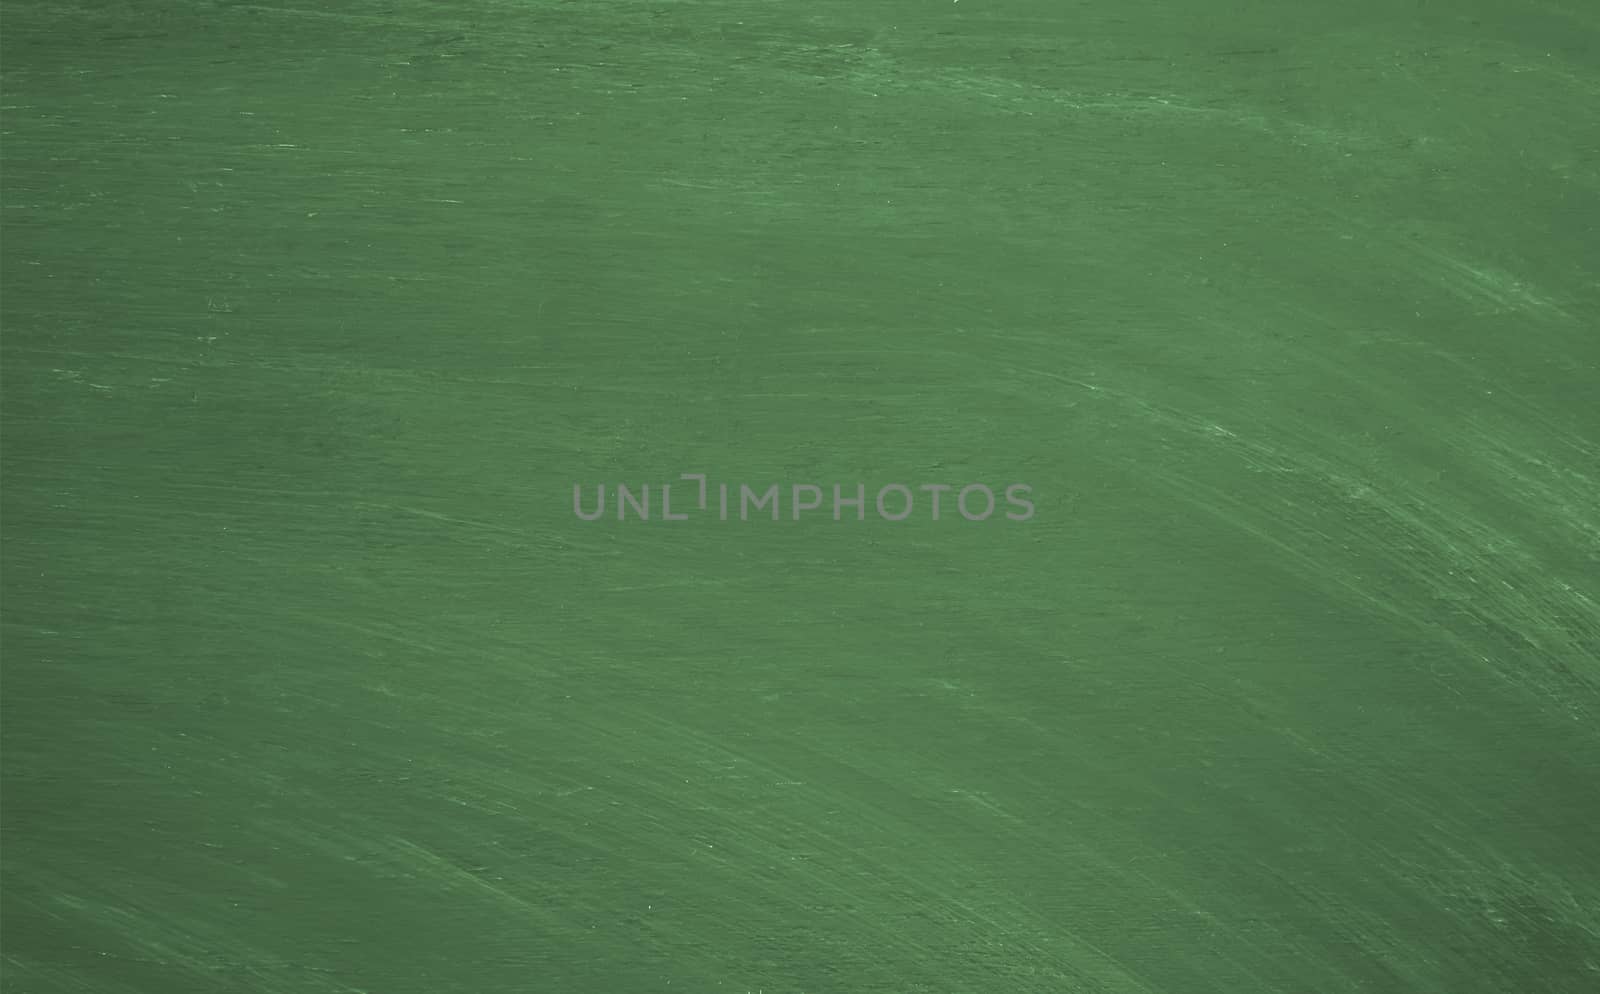 Chalk rubbed out on green blackboard for background.